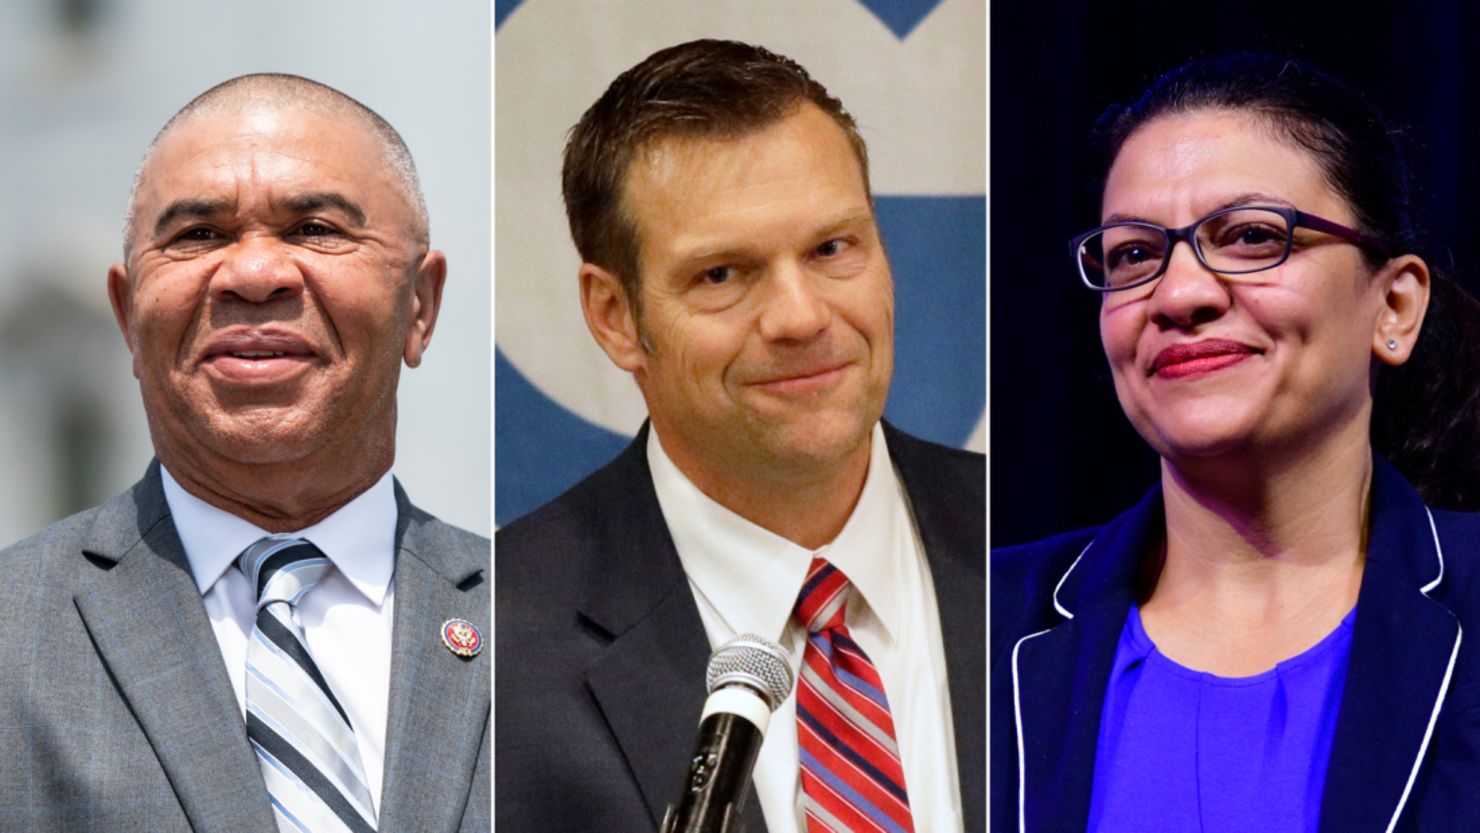 From left, Rep. Lacy Clay of Missouri, former Kansas Secretary of State Kris Kobach and Rep. Rashida Tlaib of Michigan -- three politicians facing primaries on Tuesday.